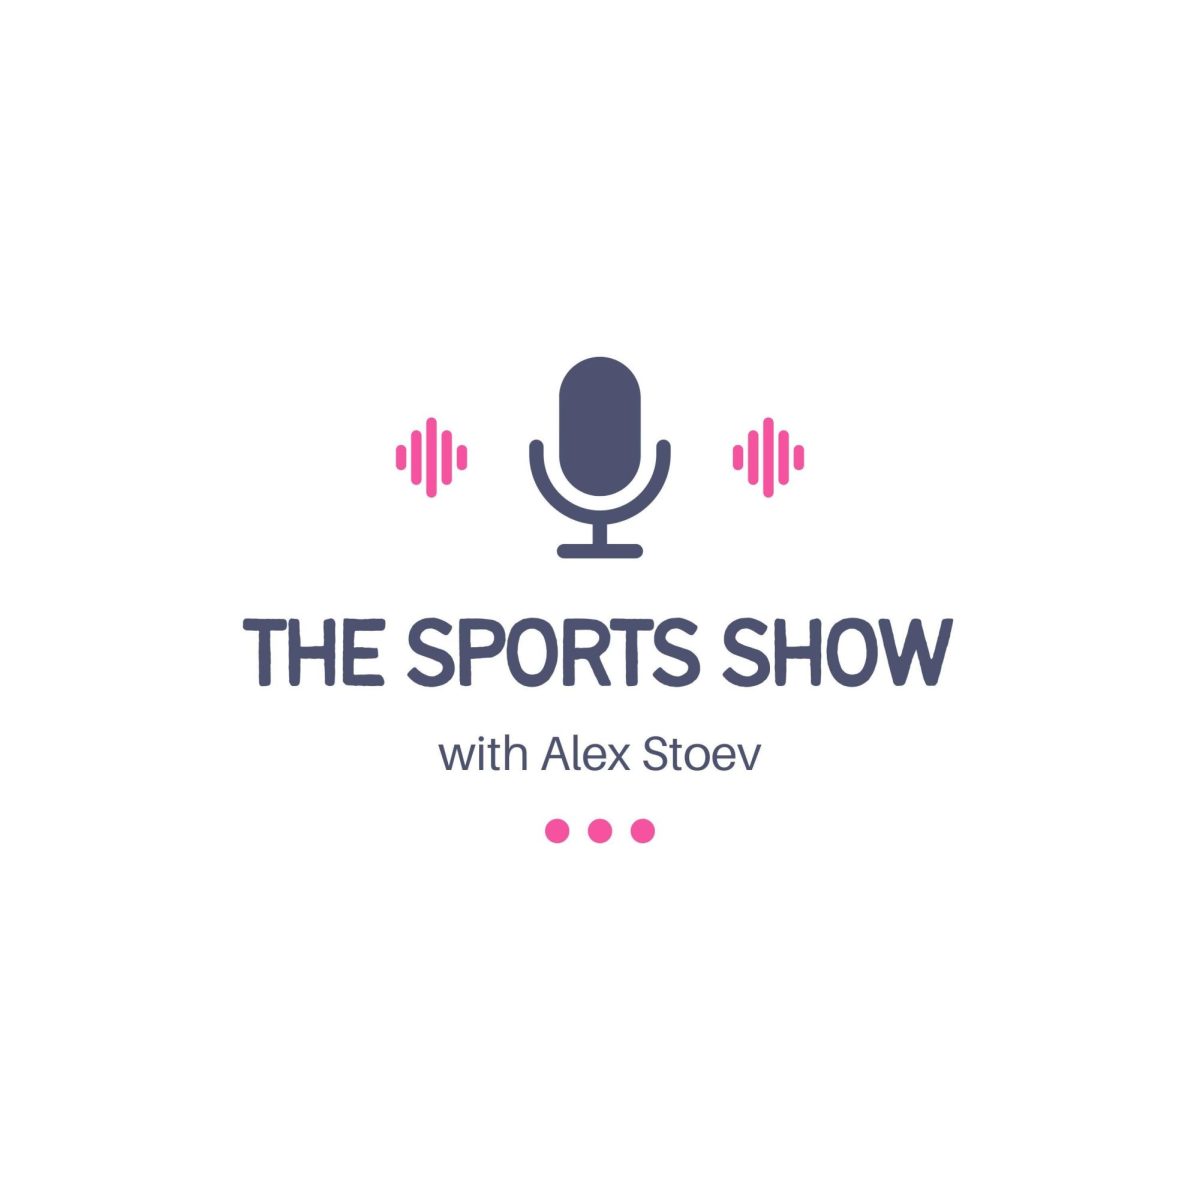 Illustration+for+the+podcast+The+Sports+Show+with+Alex+Stoev.